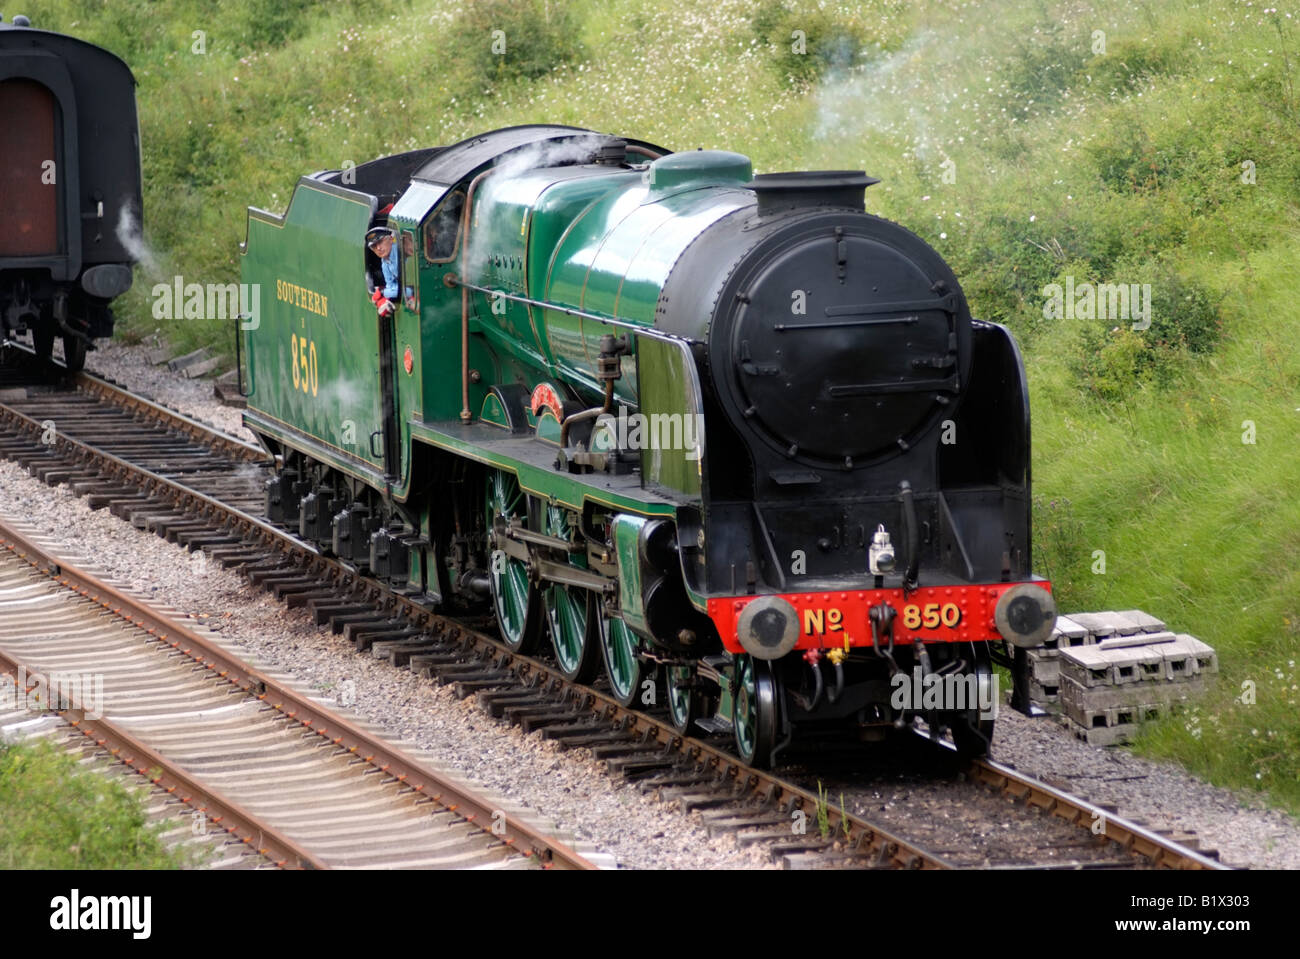 Steam engine 850 Lord Nelson train in Cotswolds countryside Gloucestershire England Stock Photo